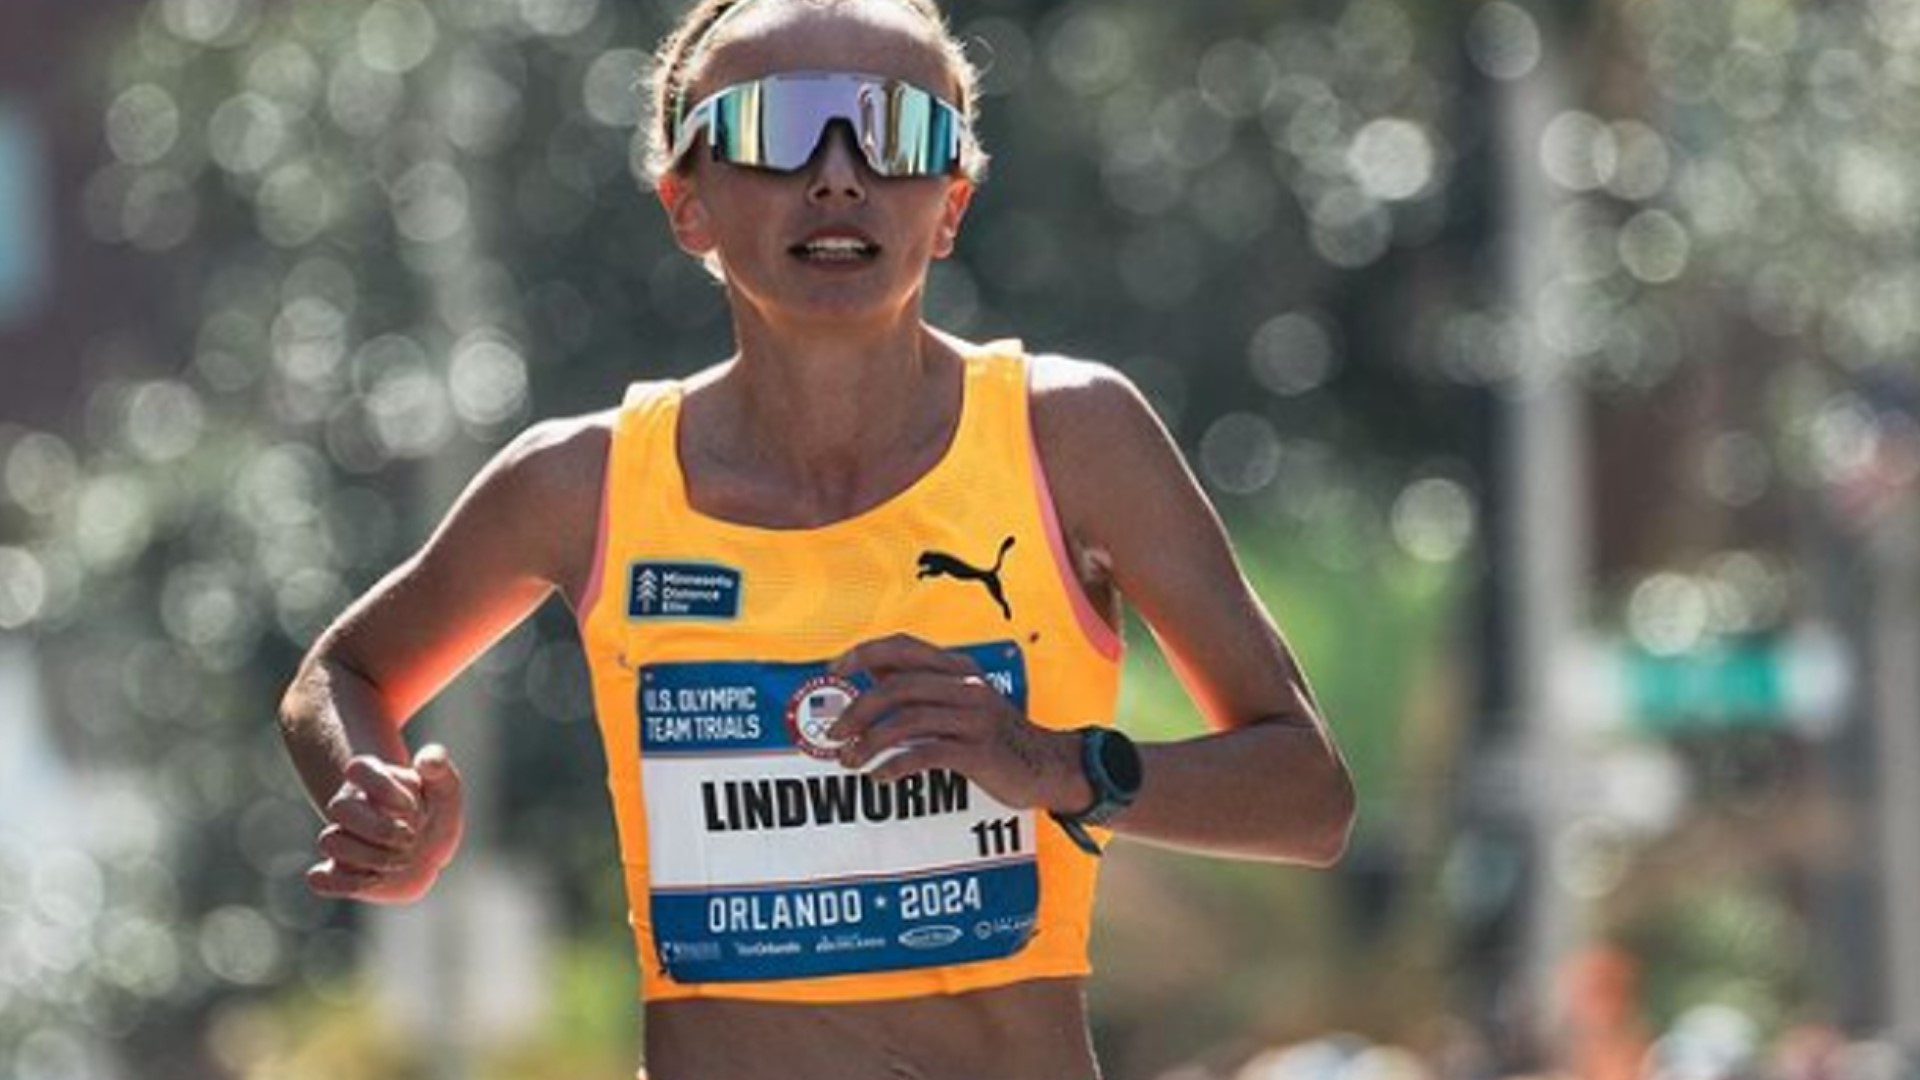 On Saturday Lindwurm became the first Minnesotan to qualify for the 2024 Paris Olympics with a marathon time of 2:25:21.